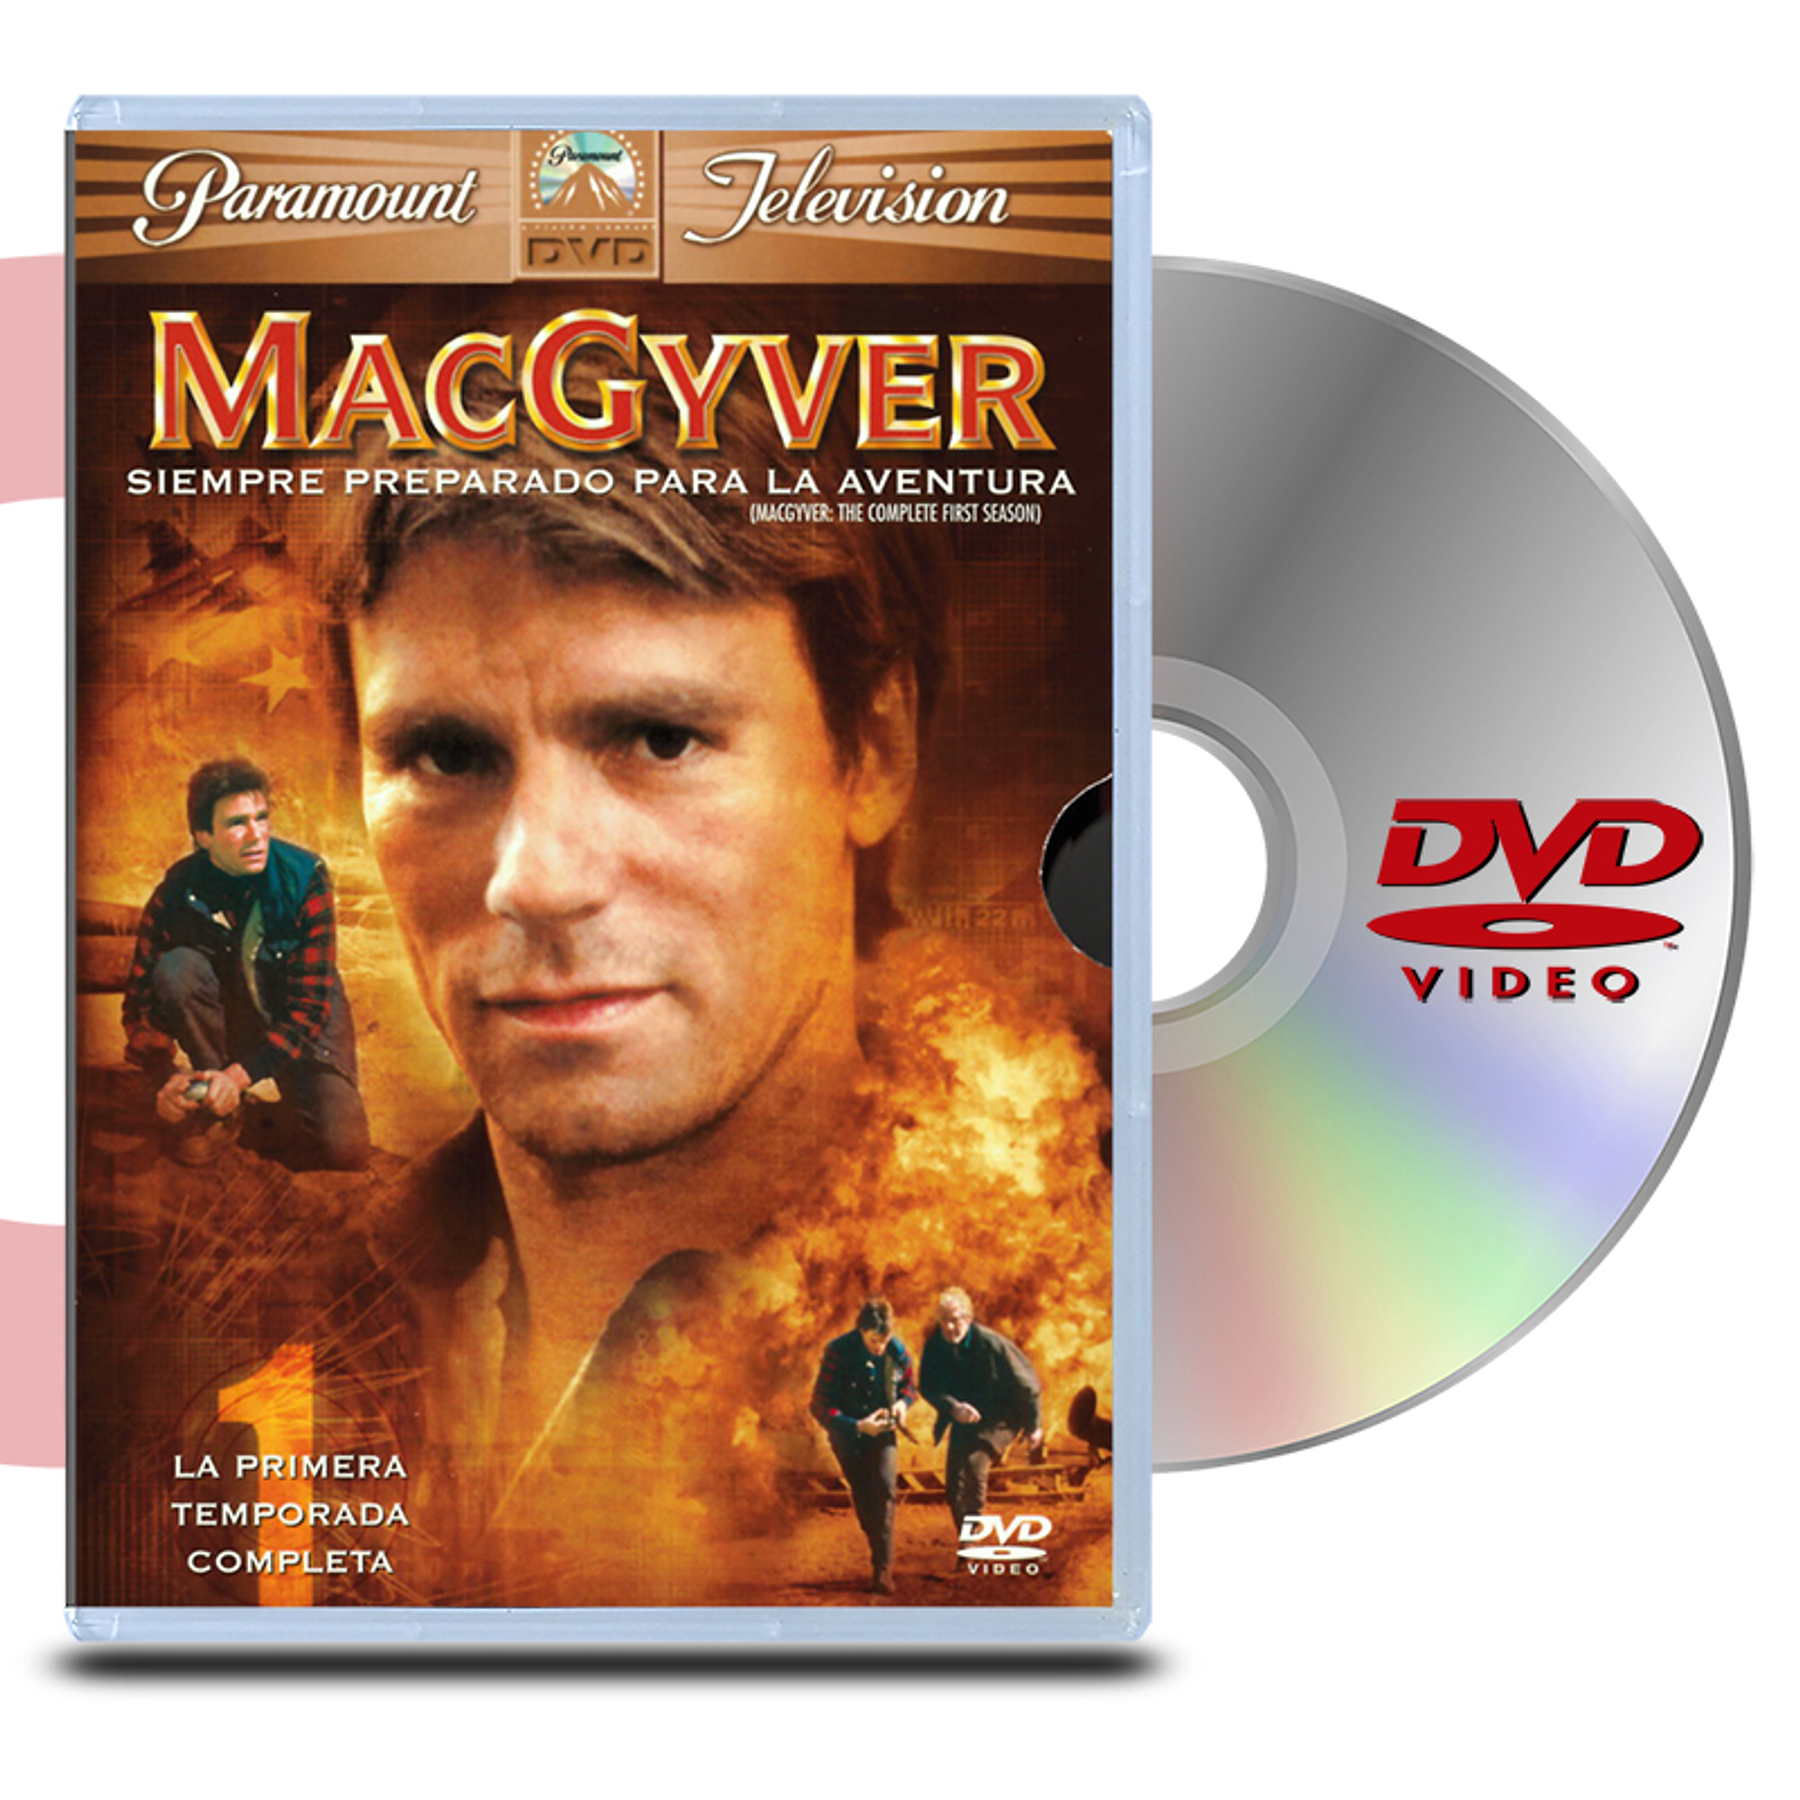 PACK DVD MACGYVER (6 DISCOS)